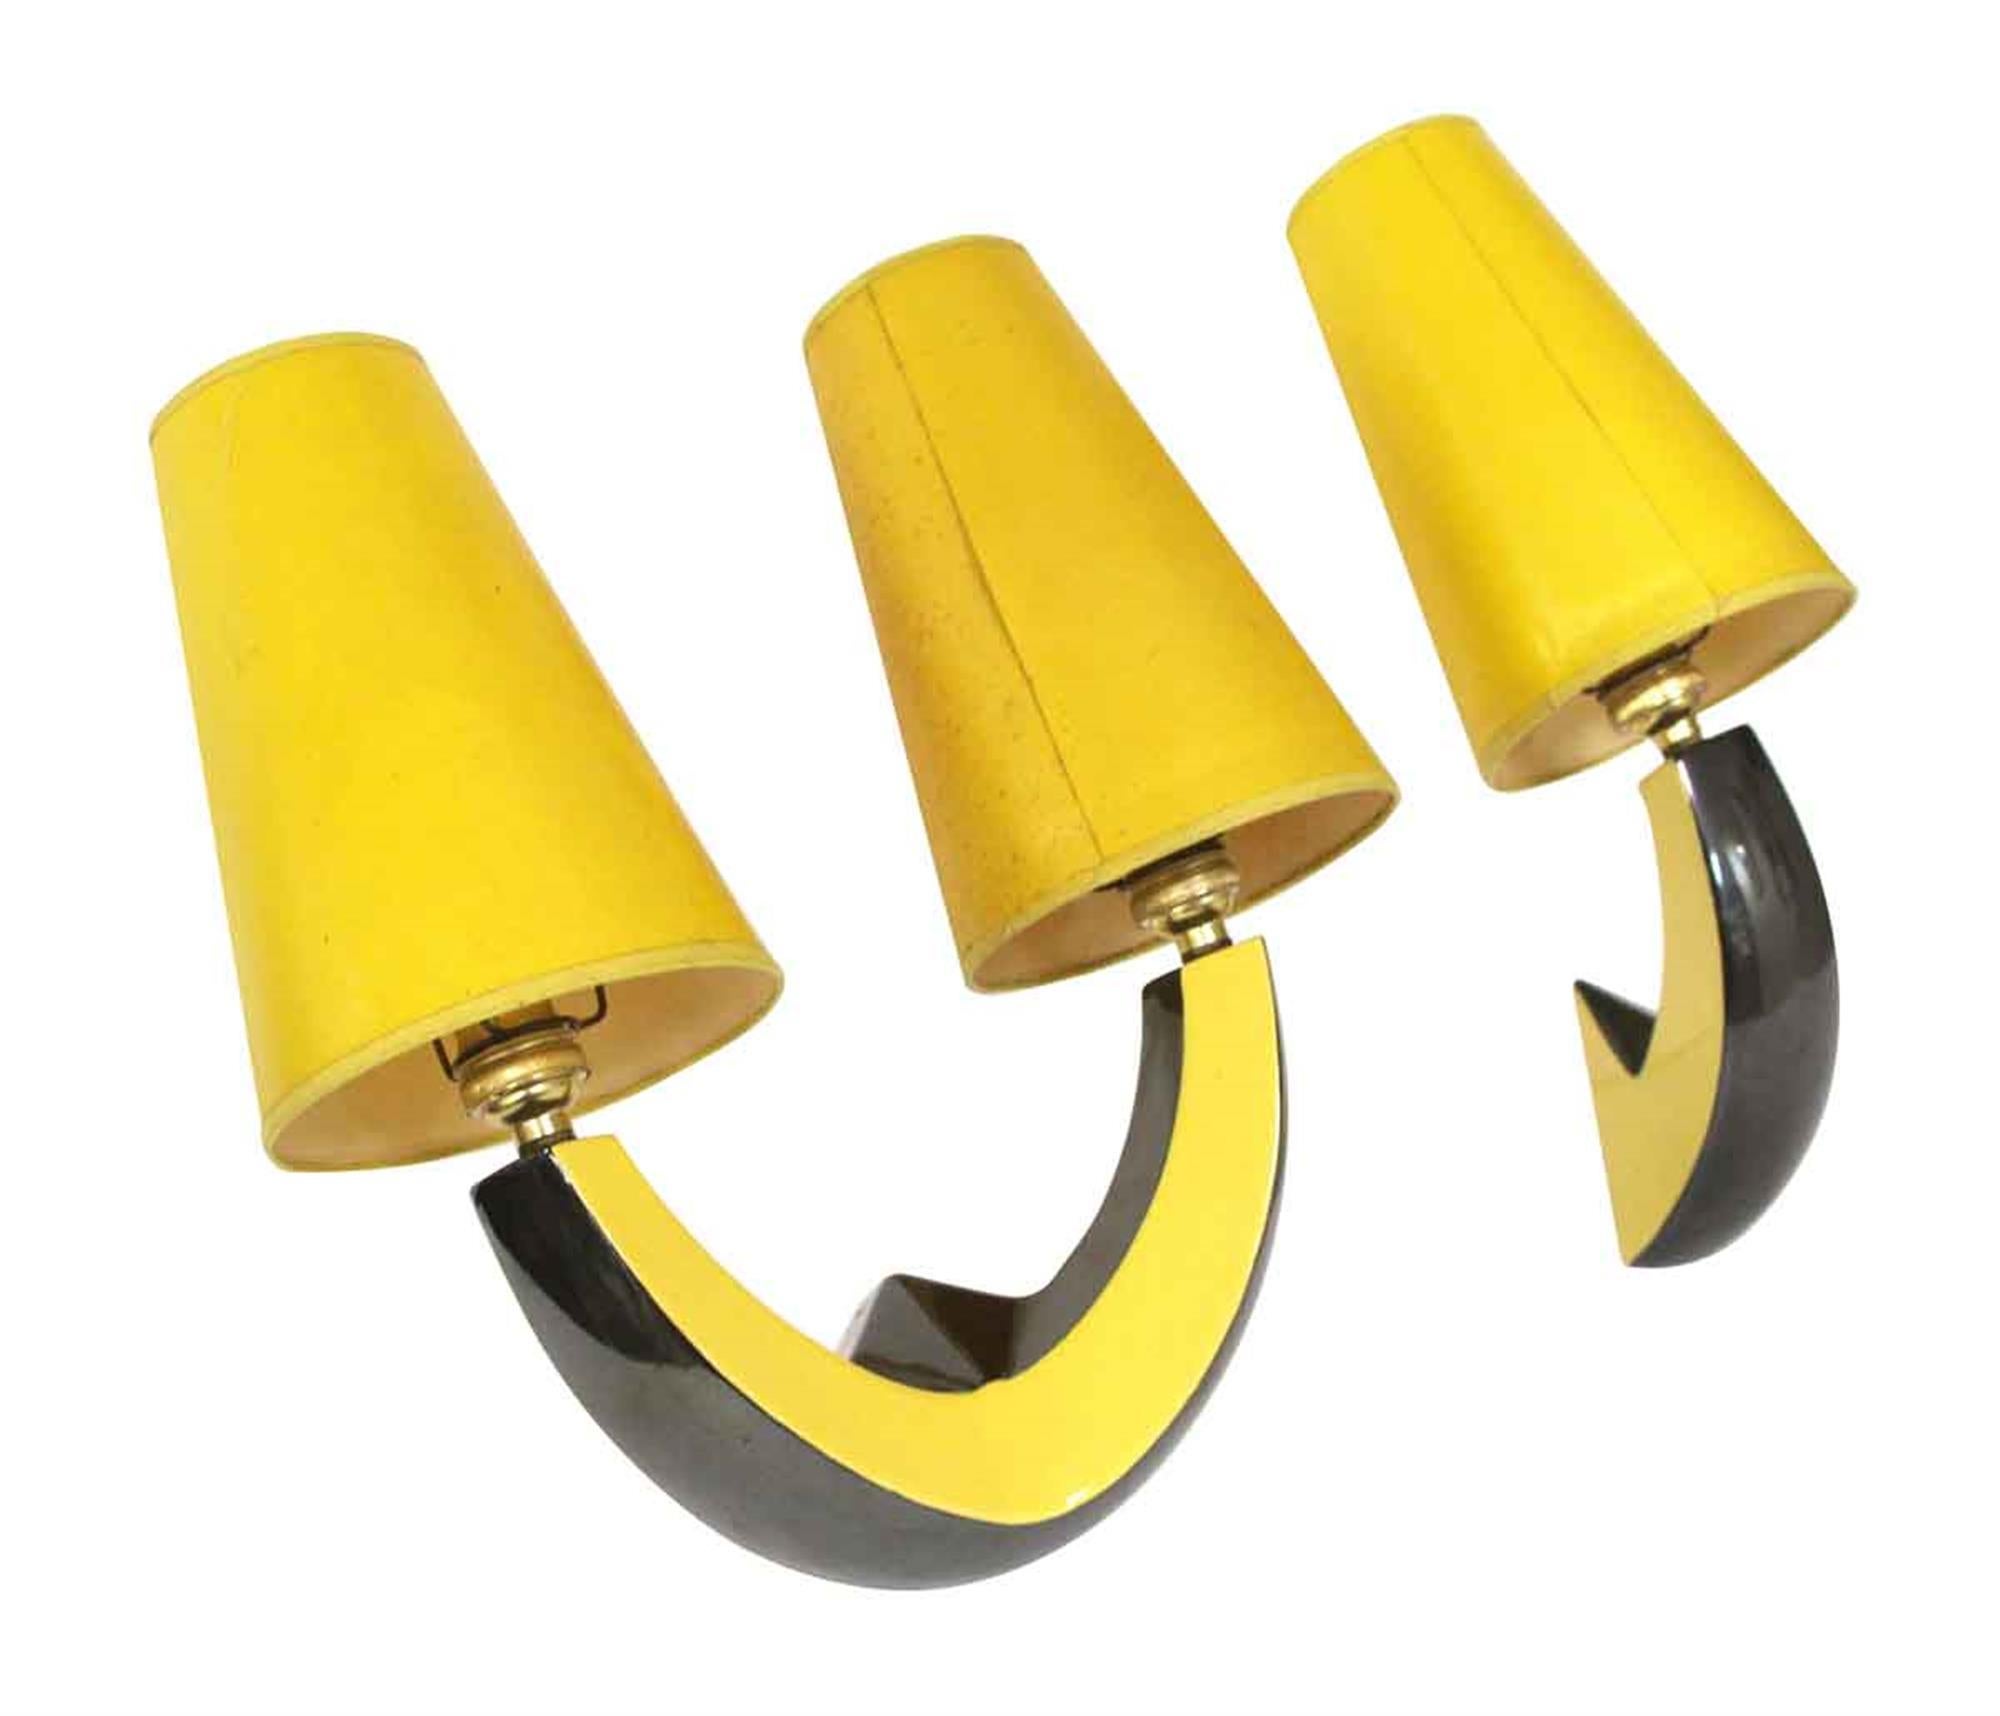 Ceramic black and yellow Mid-Century Modern style sconce set with yellow shades. From France. One sconce has two arms and one is a single arm. Needs re-wiring for the US. This can be seen at our 400 Gilligan St location in Scranton, PA.